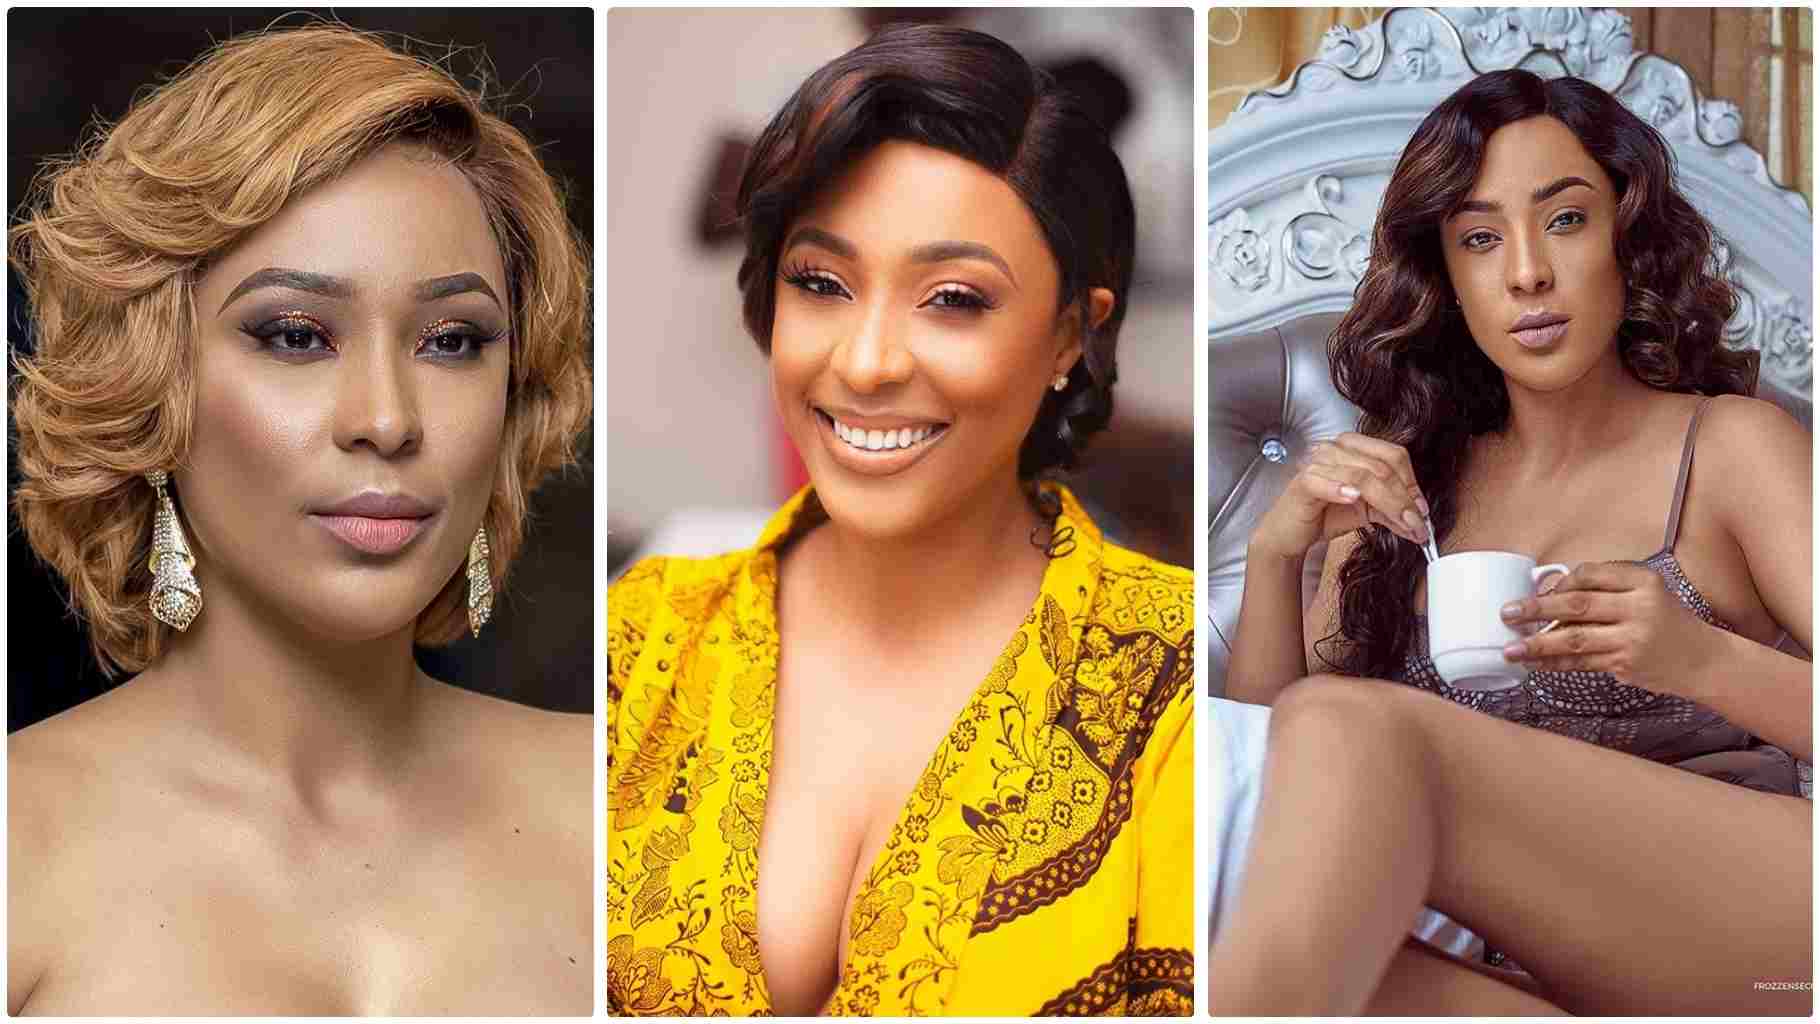 Forget winning my heart if you’re a hairy chested man – Nikki Samonas announces